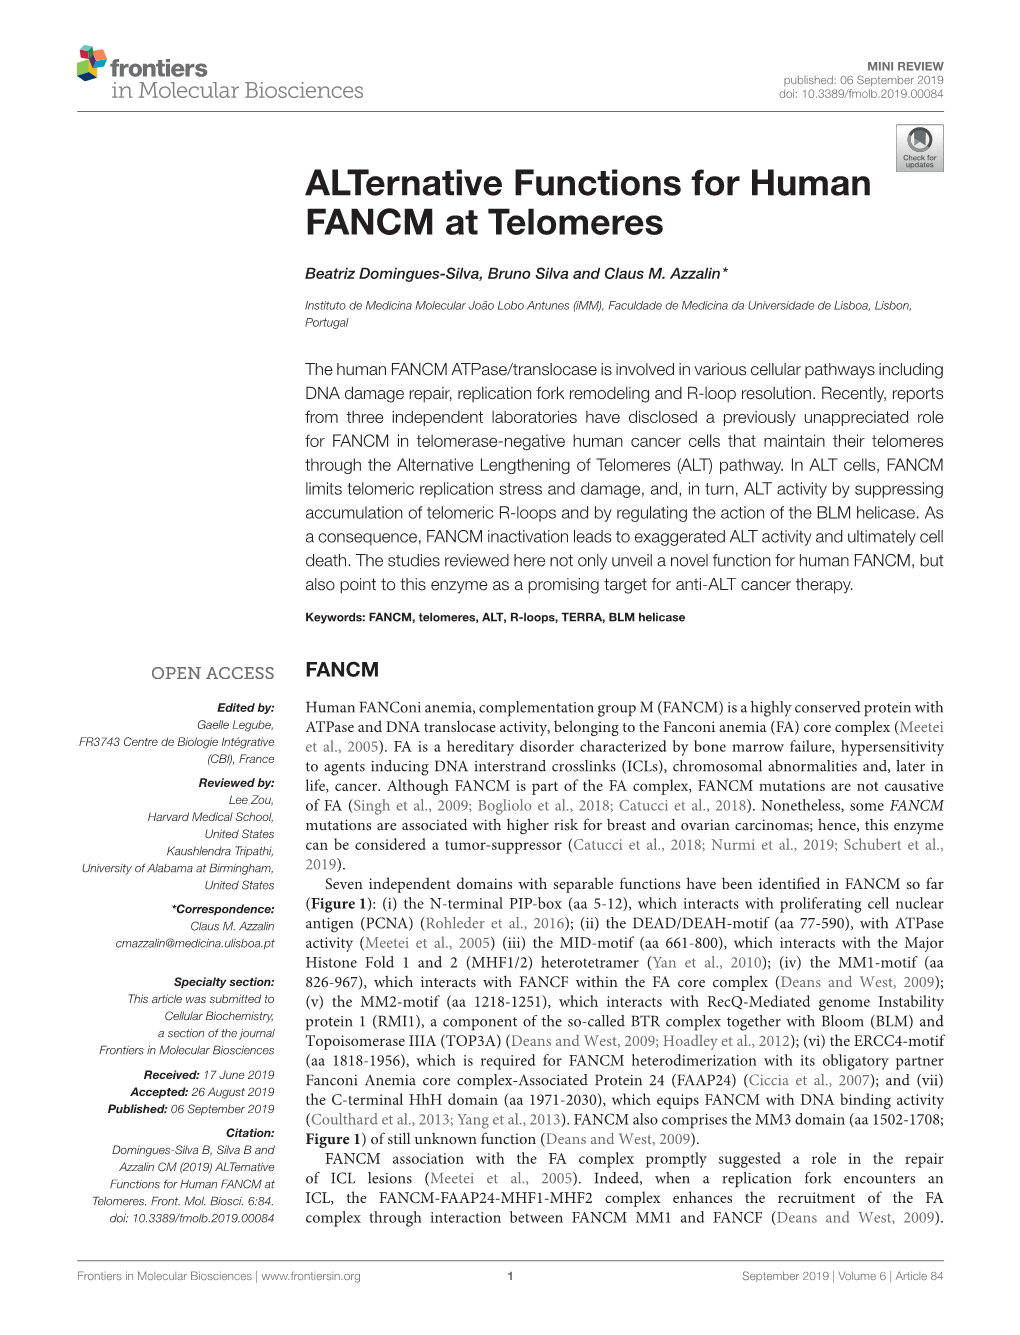 Alternative Functions for Human FANCM at Telomeres